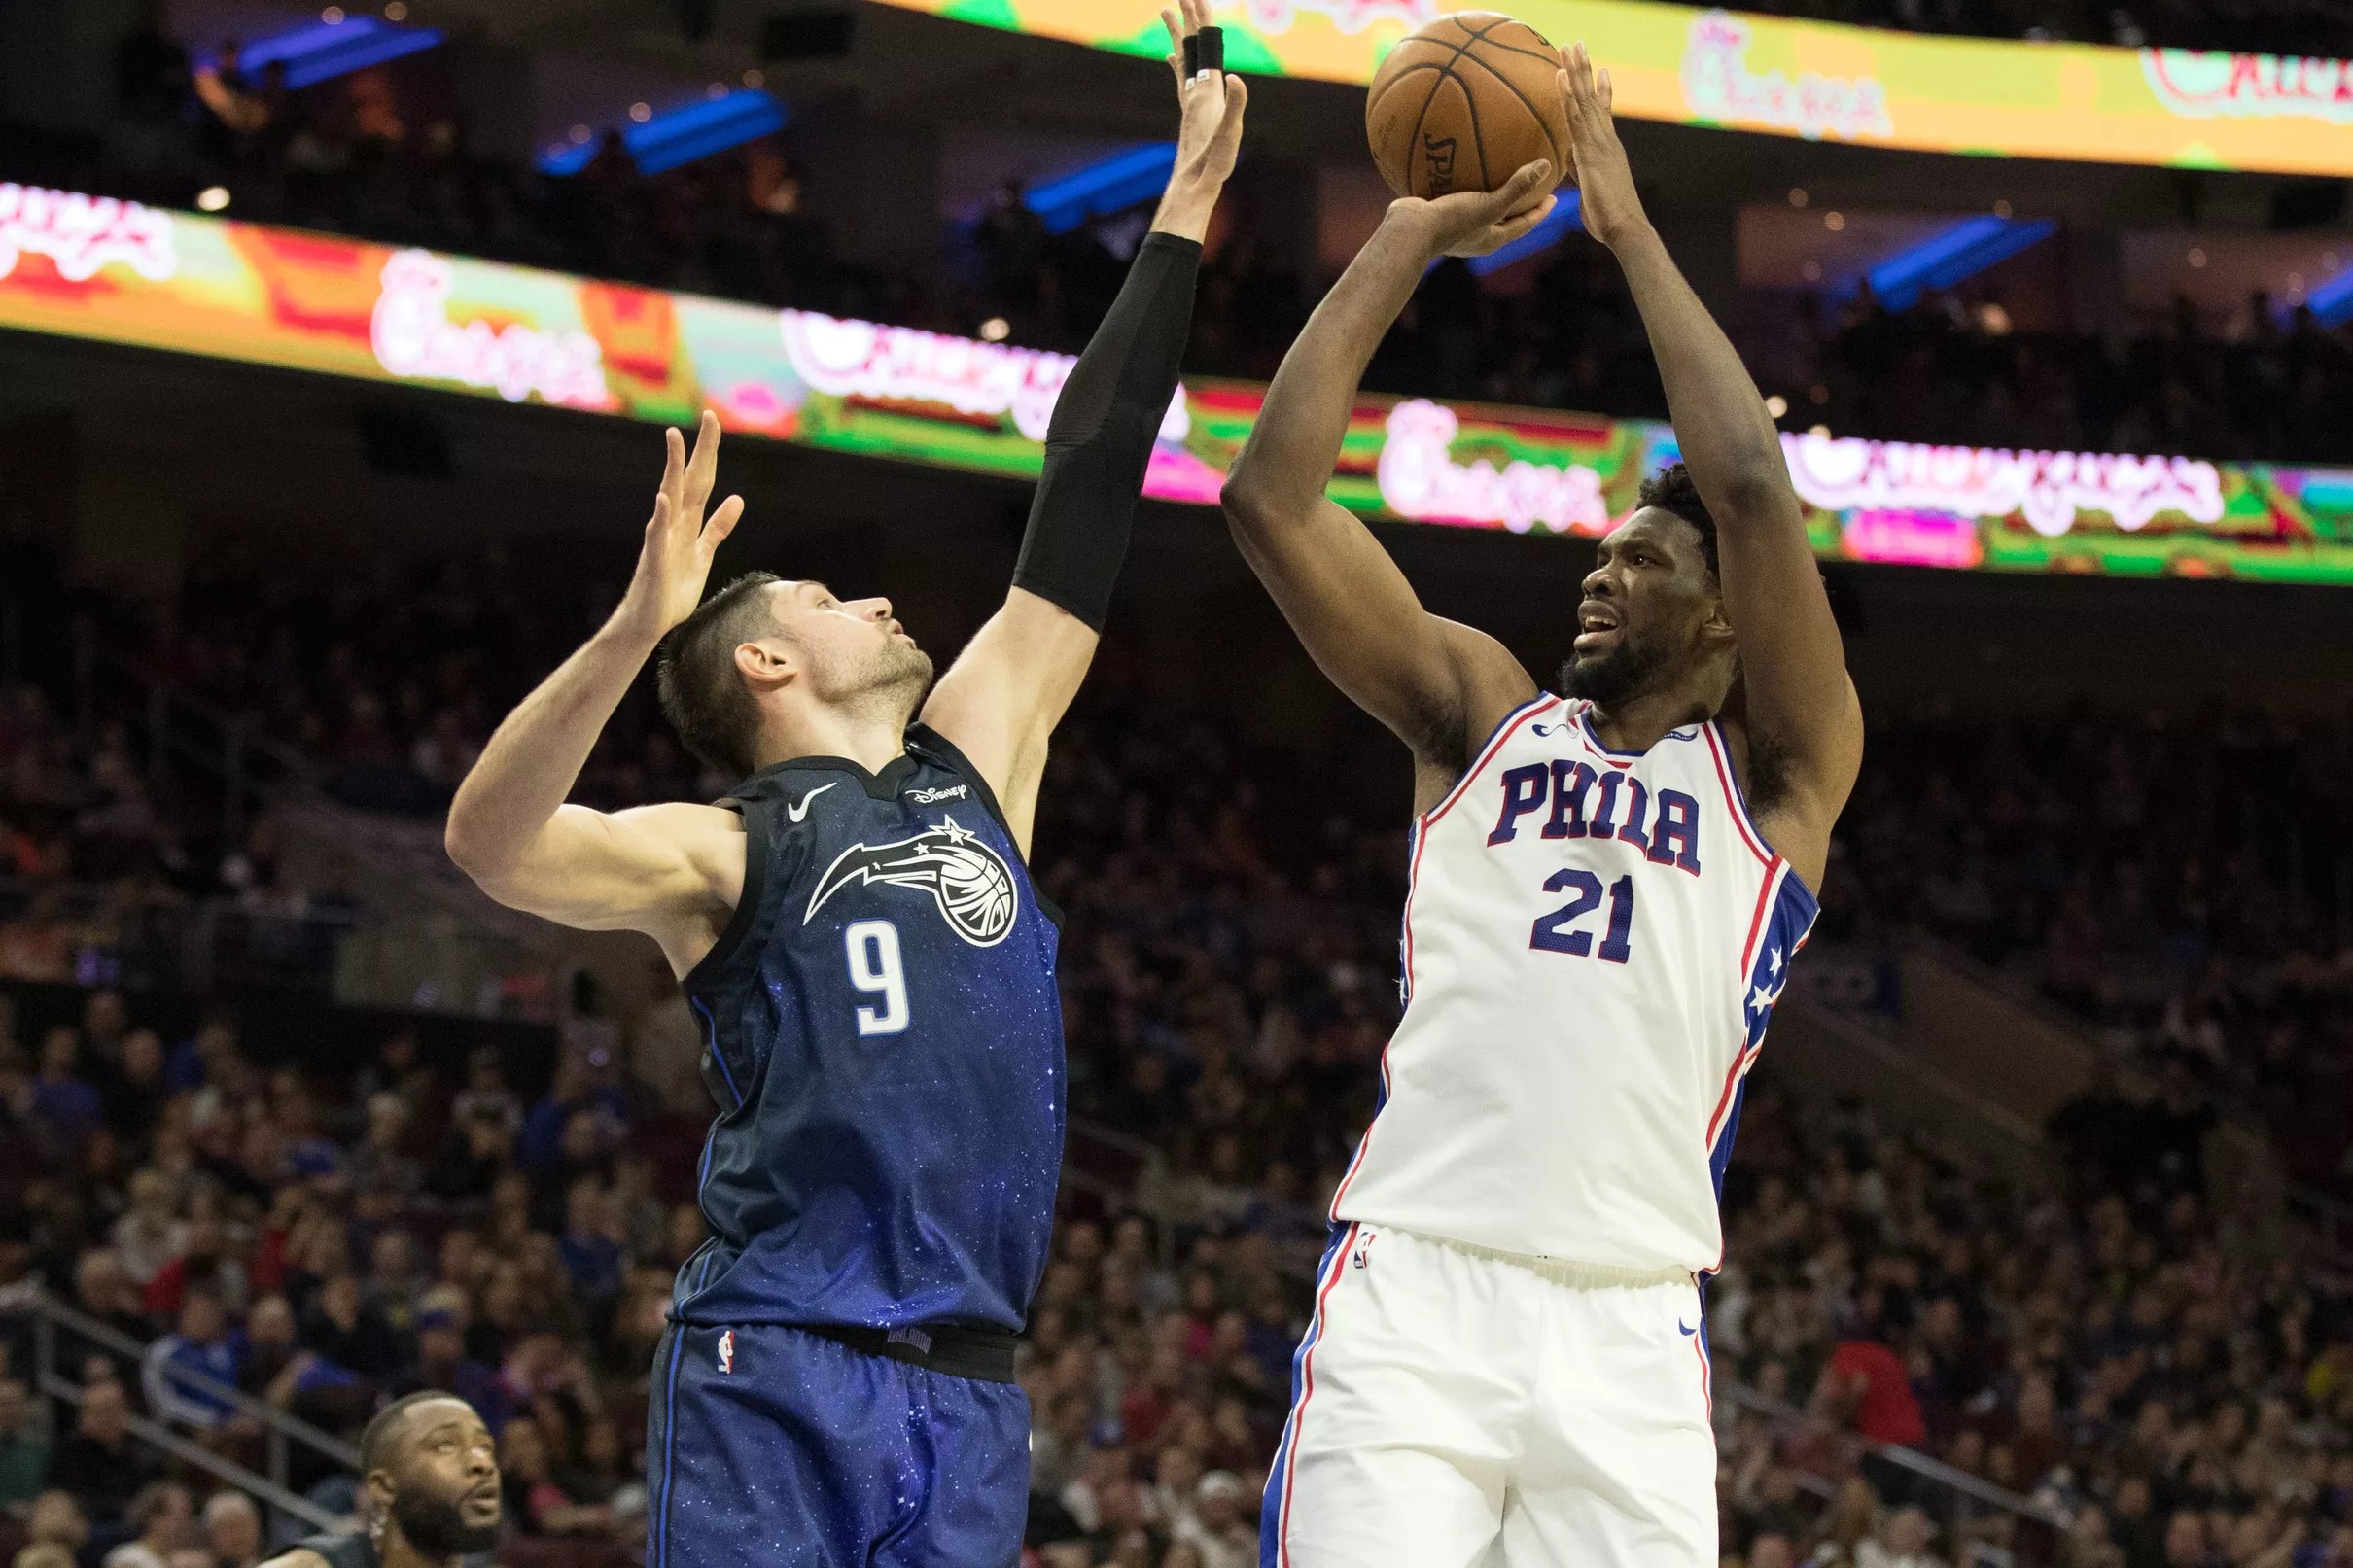 Sixers vs. Magic Preview and Game Thread